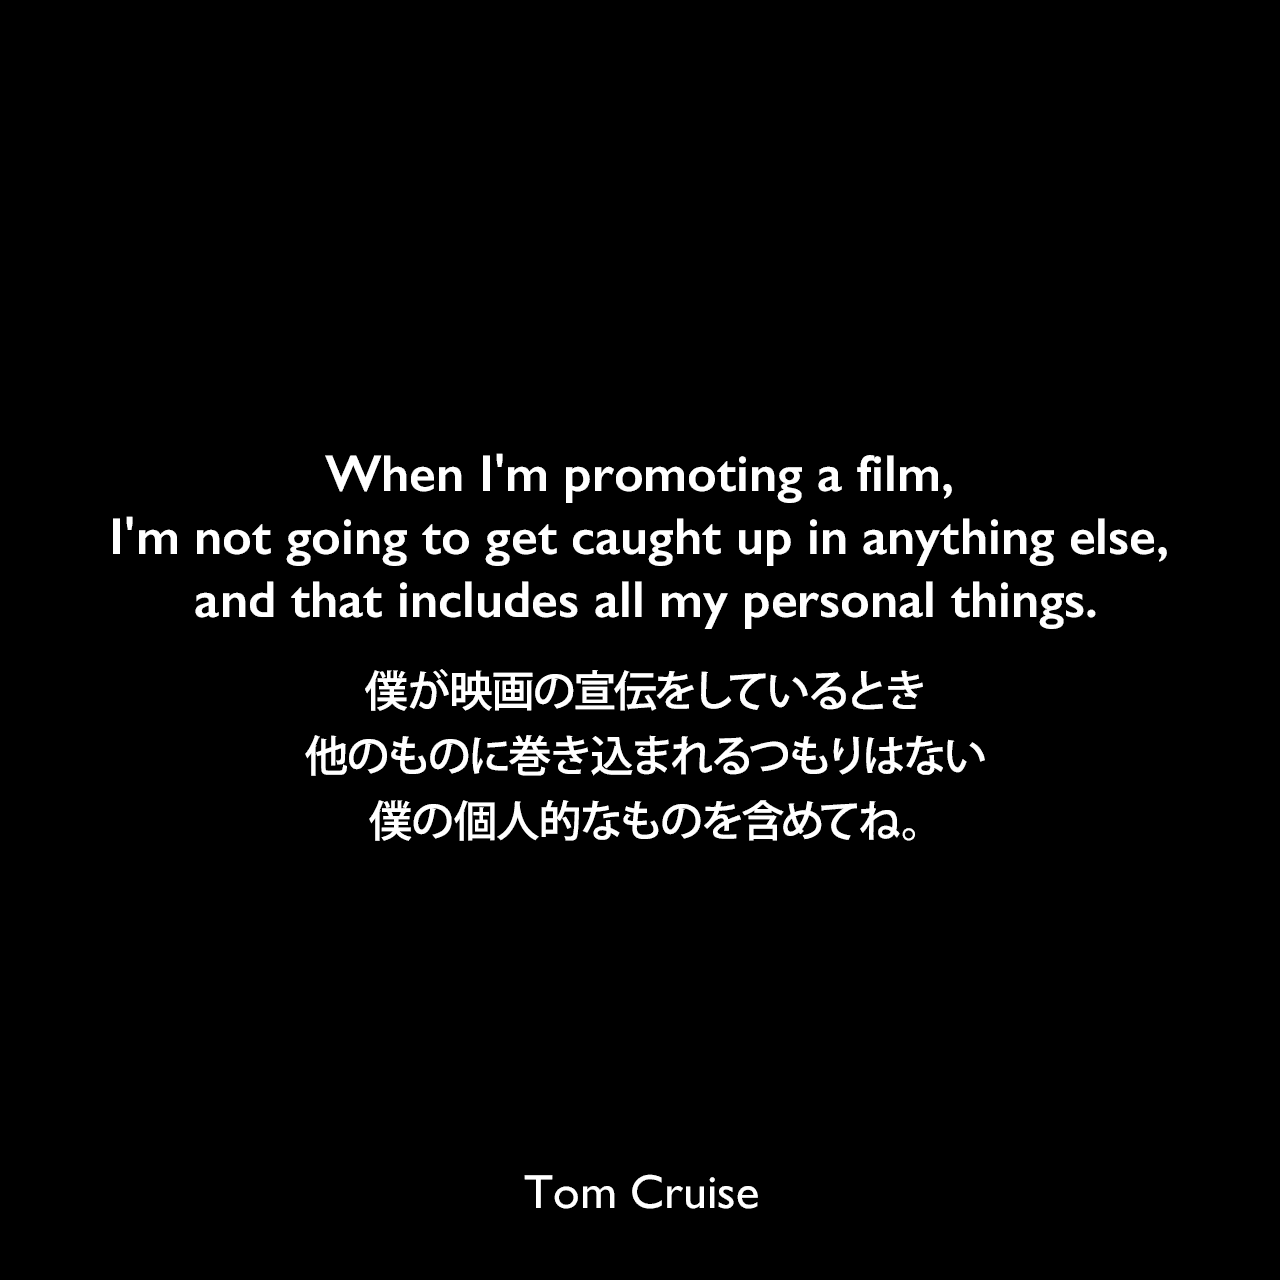 When I'm promoting a film, I'm not going to get caught up in anything else, and that includes all my personal things.僕が映画の宣伝をしているとき、他のものに巻き込まれるつもりはない、僕の個人的なものを含めてね。Tom Cruise